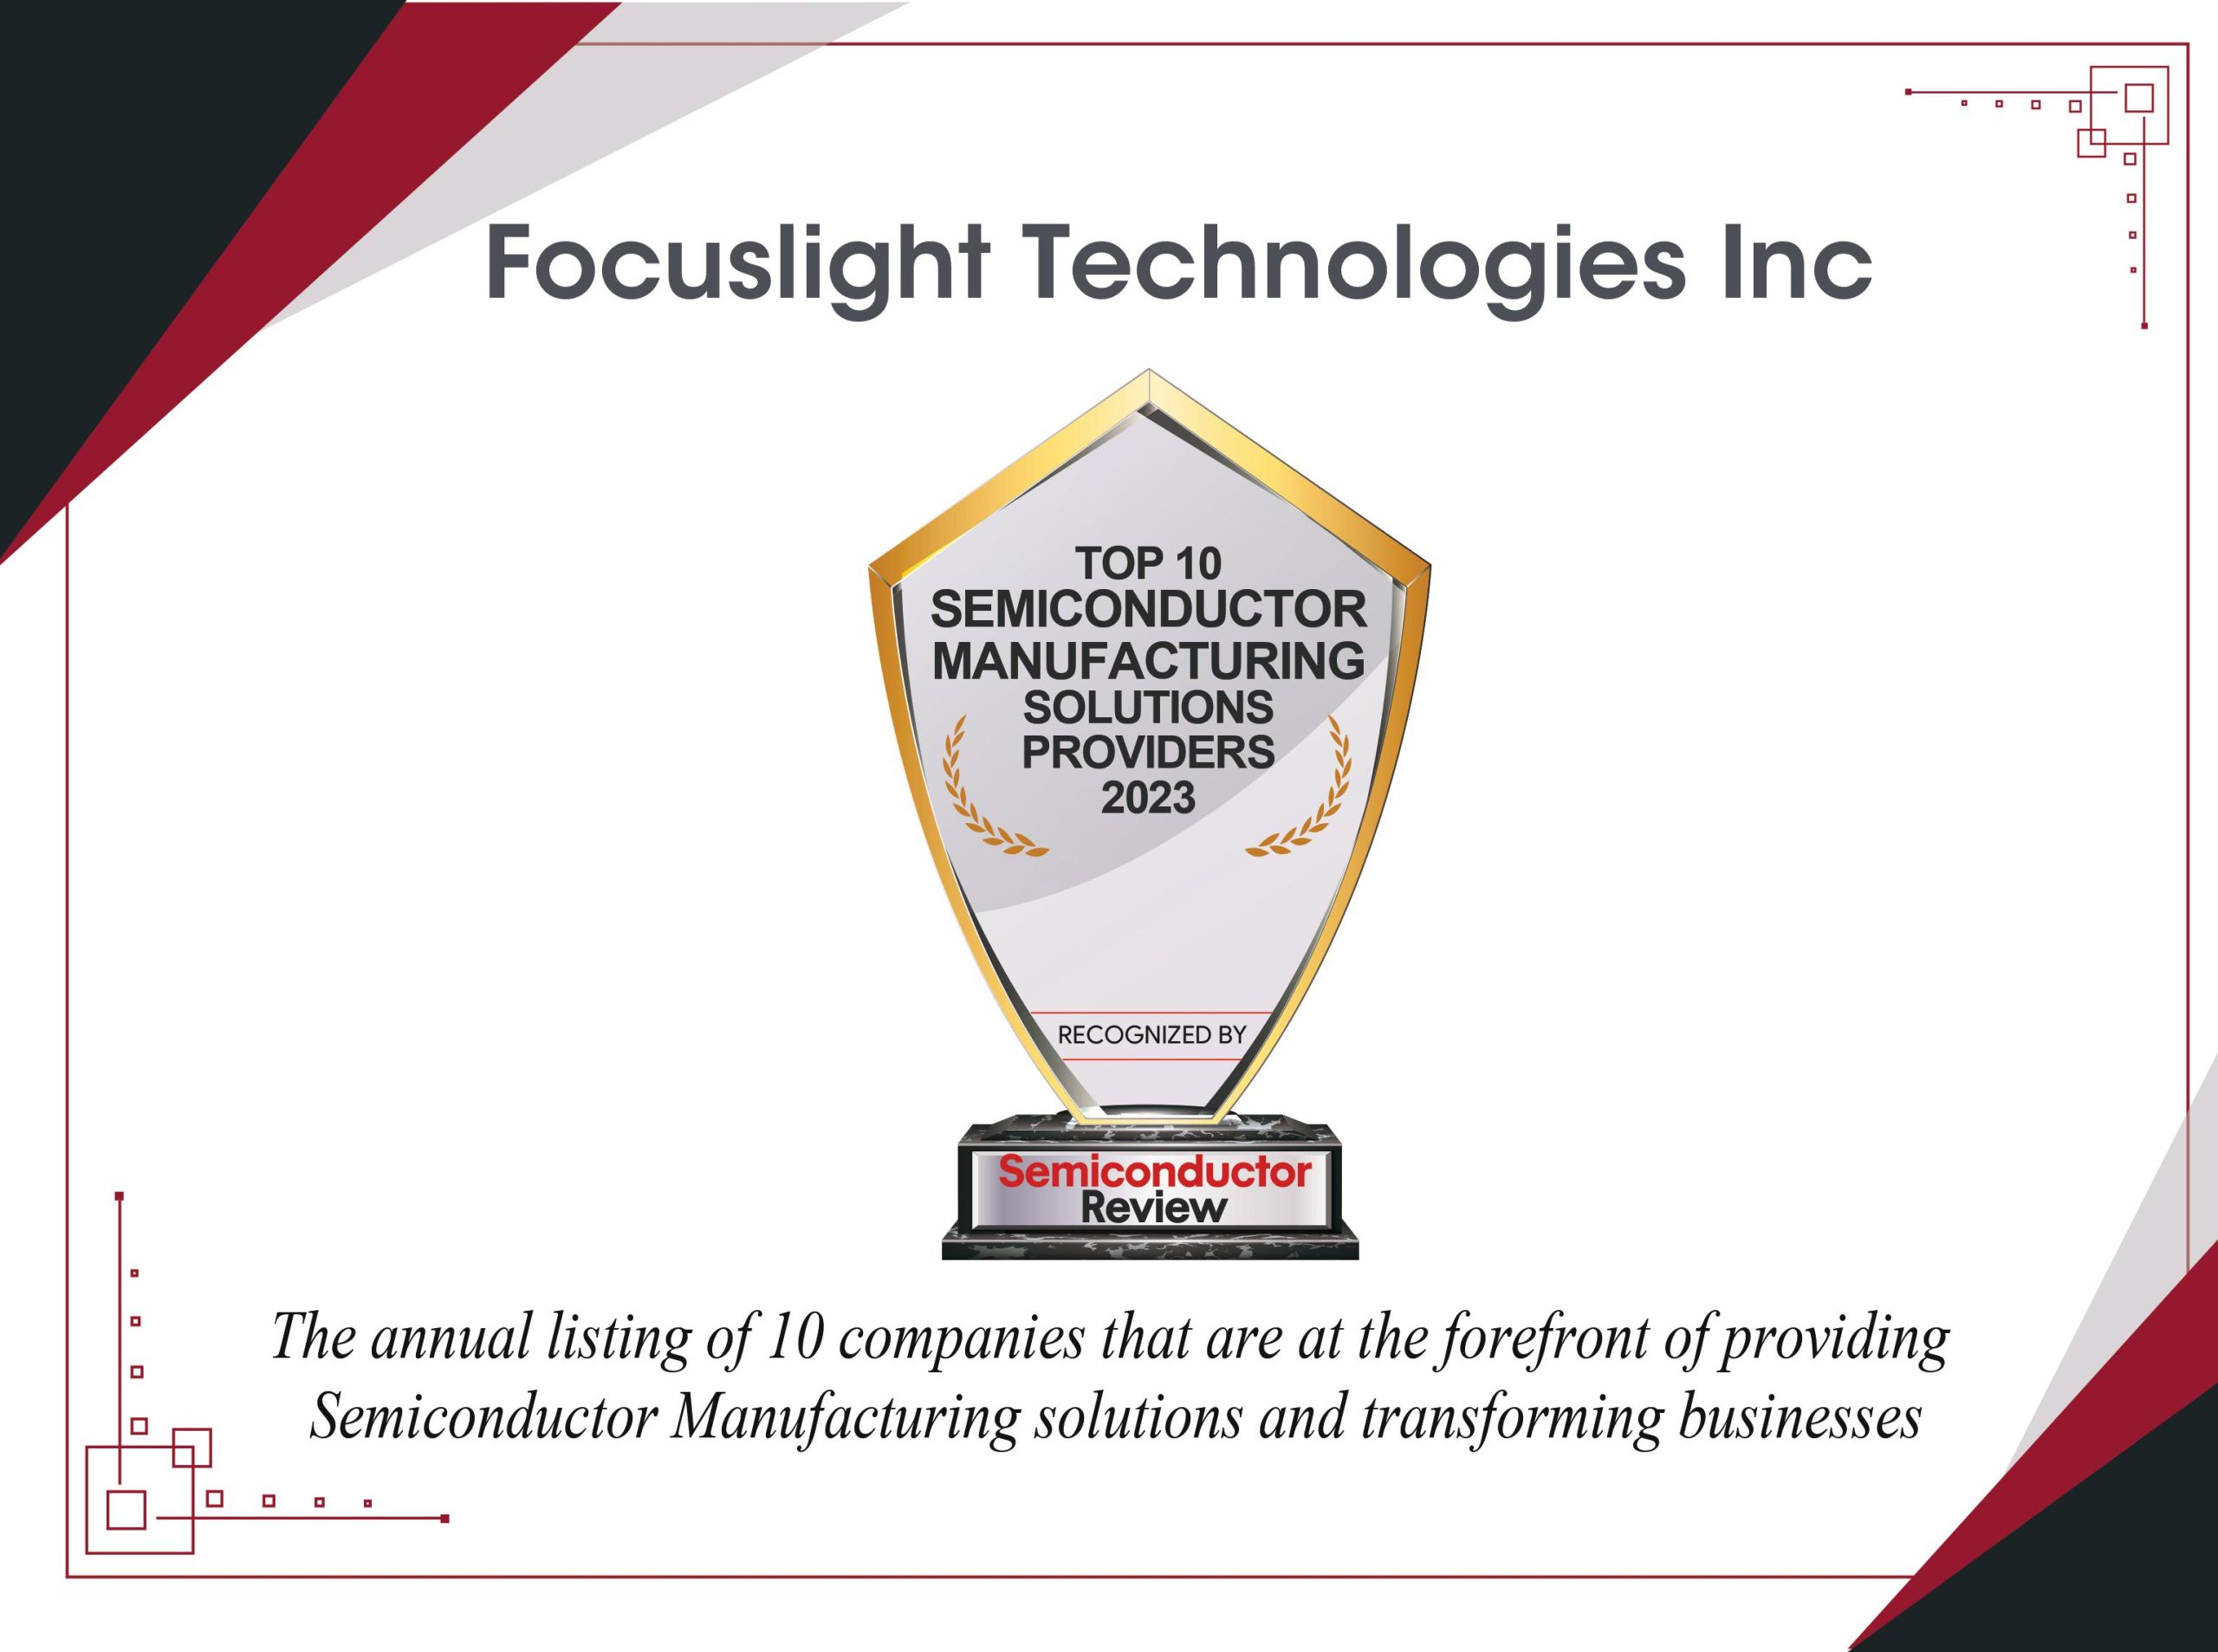 Focuslight is listed as one of 